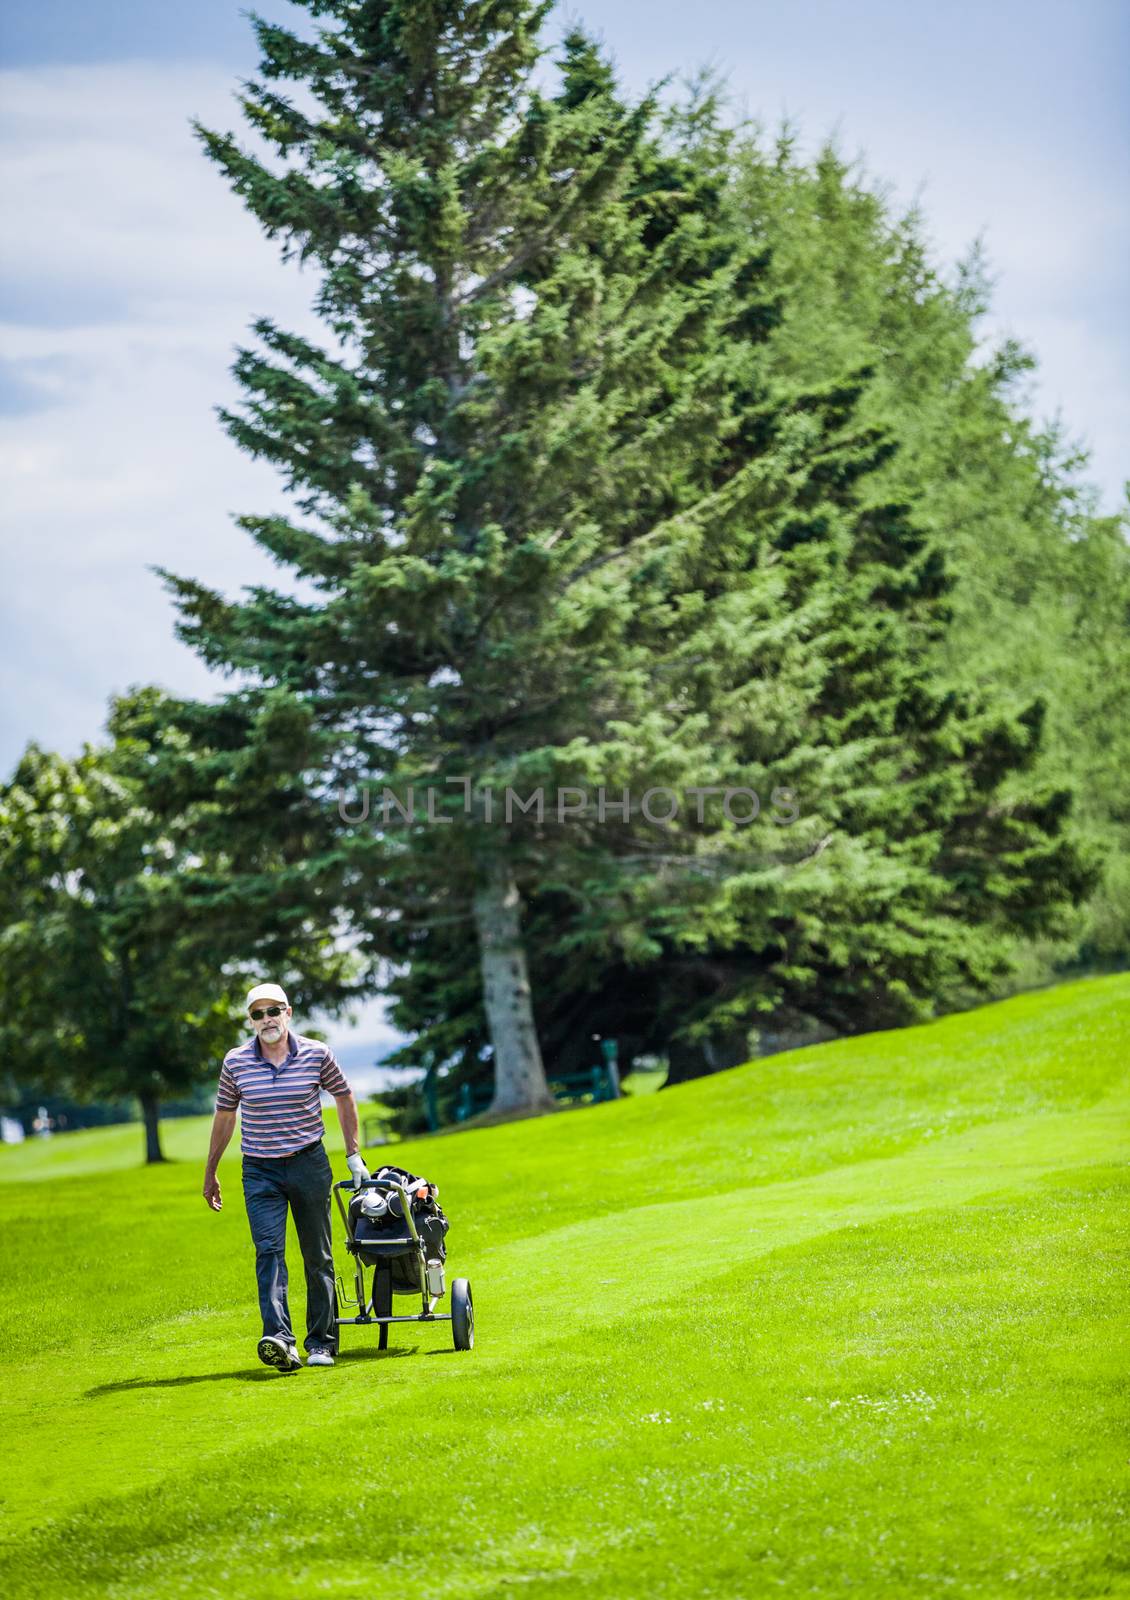 Mature Golfer on a Golf Course Walking with Golf bag